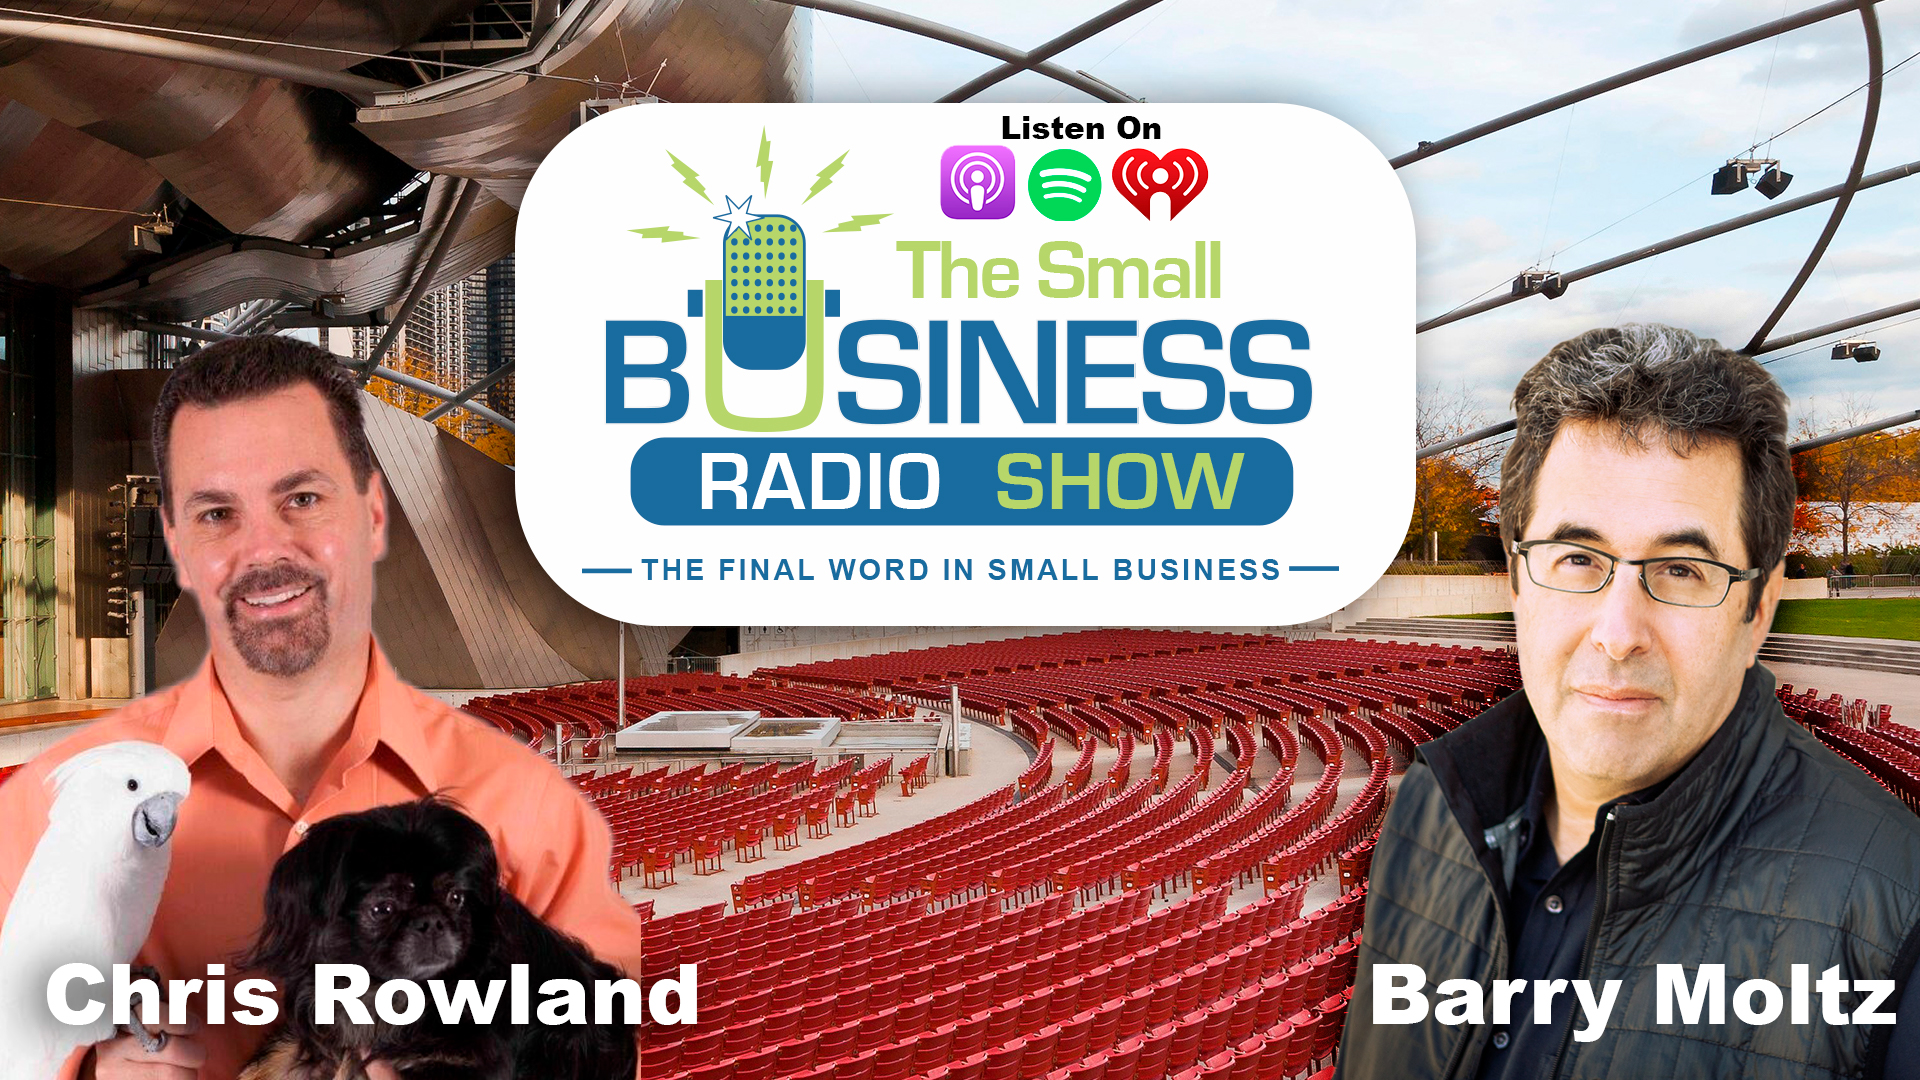 Chris Rowland on The Small Business Radio Show